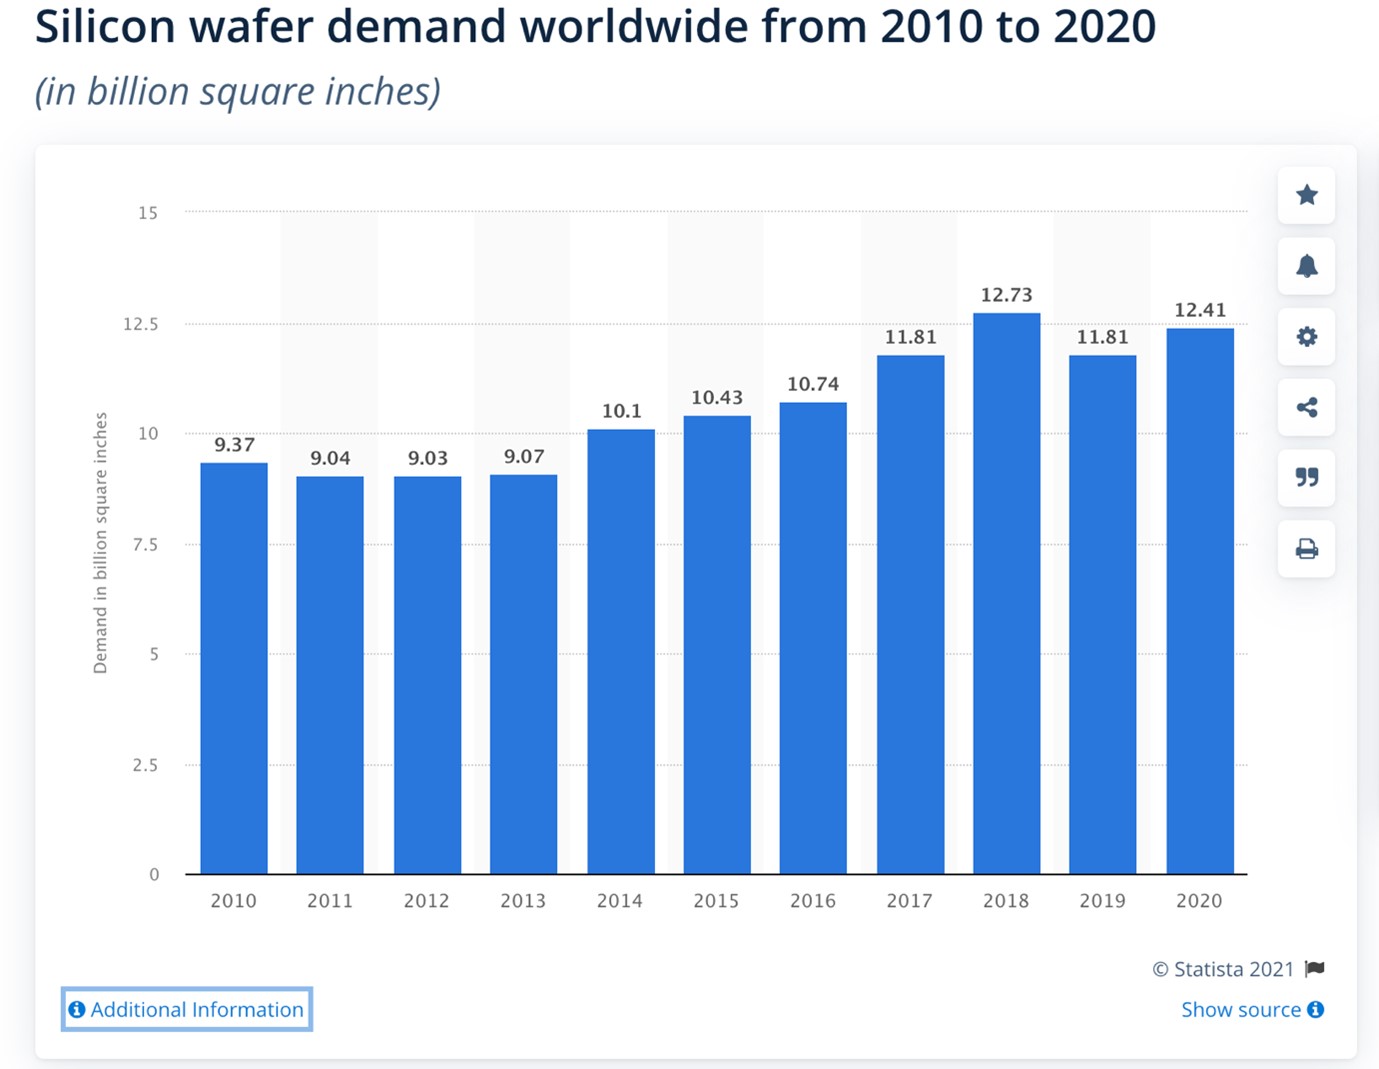 Silicon Wafer Demand from 2010 to 2020